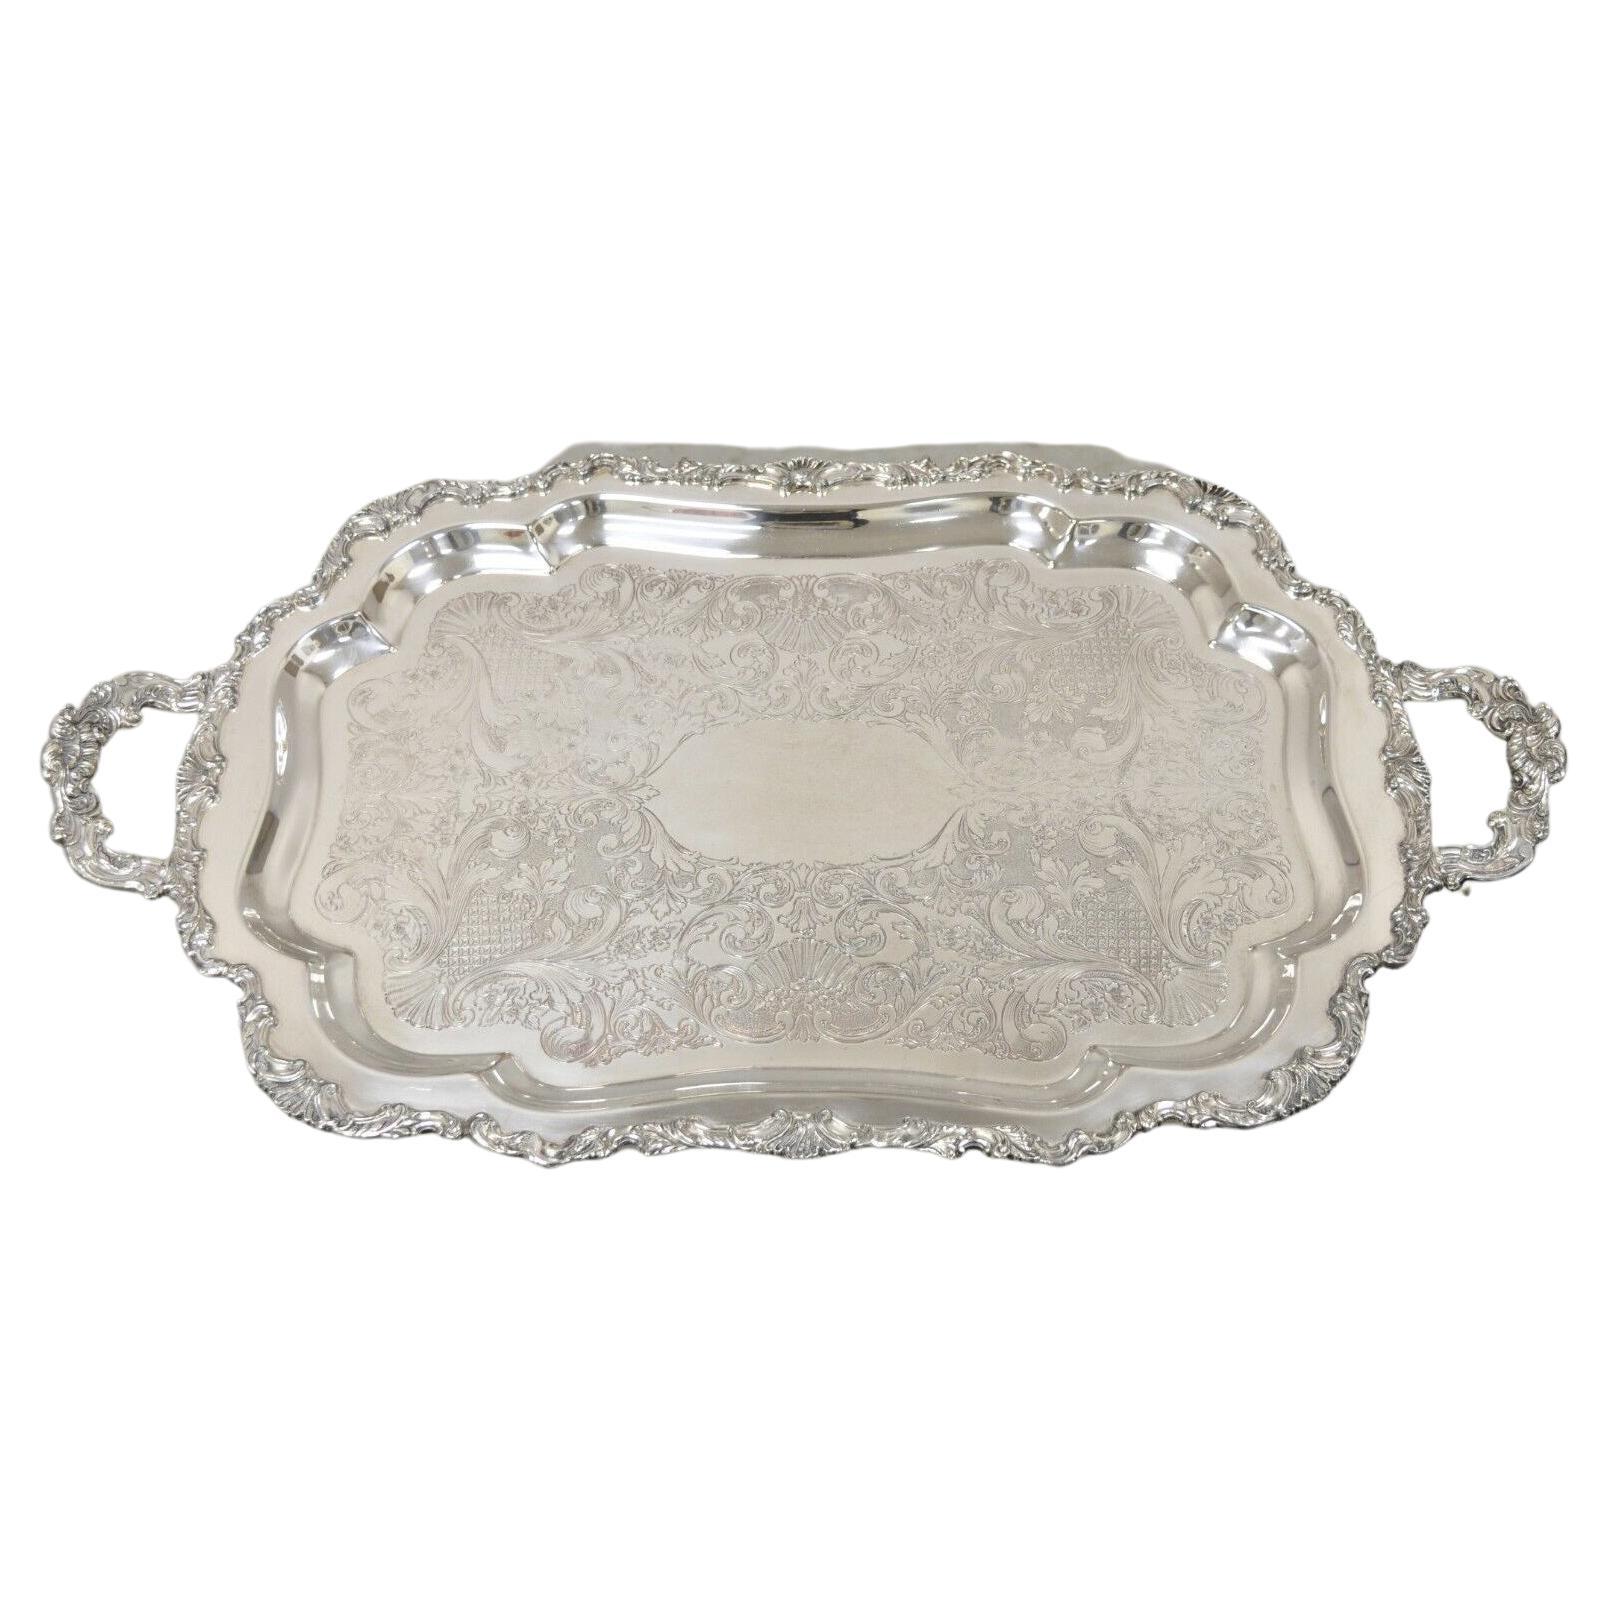 Community Ascot 0316-10 Silver Plated Ornate Twin Handle Serving Platter Tray For Sale